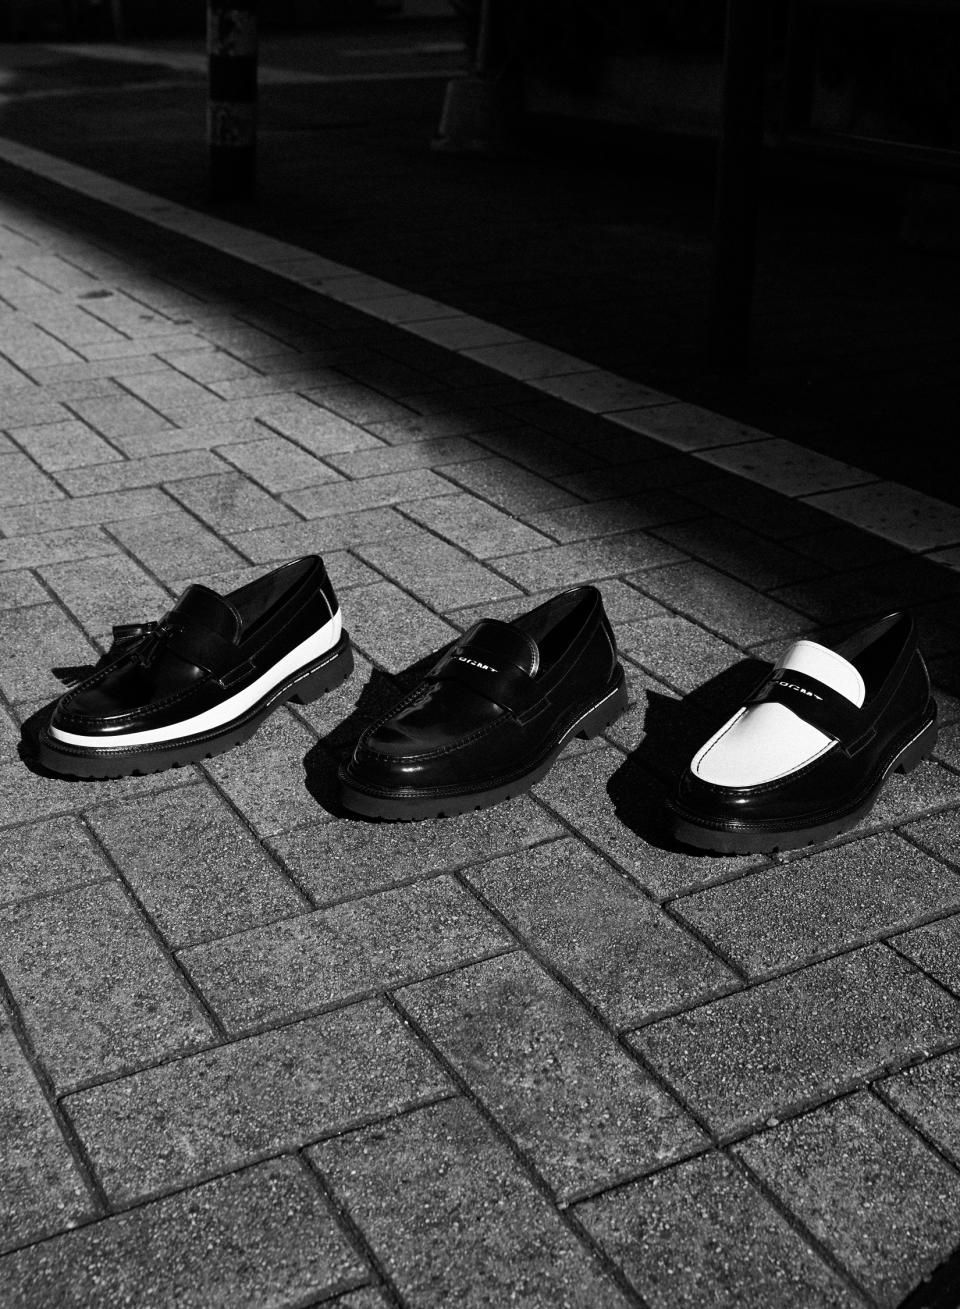 Cole Haan x Fragment Design American Classics Collection